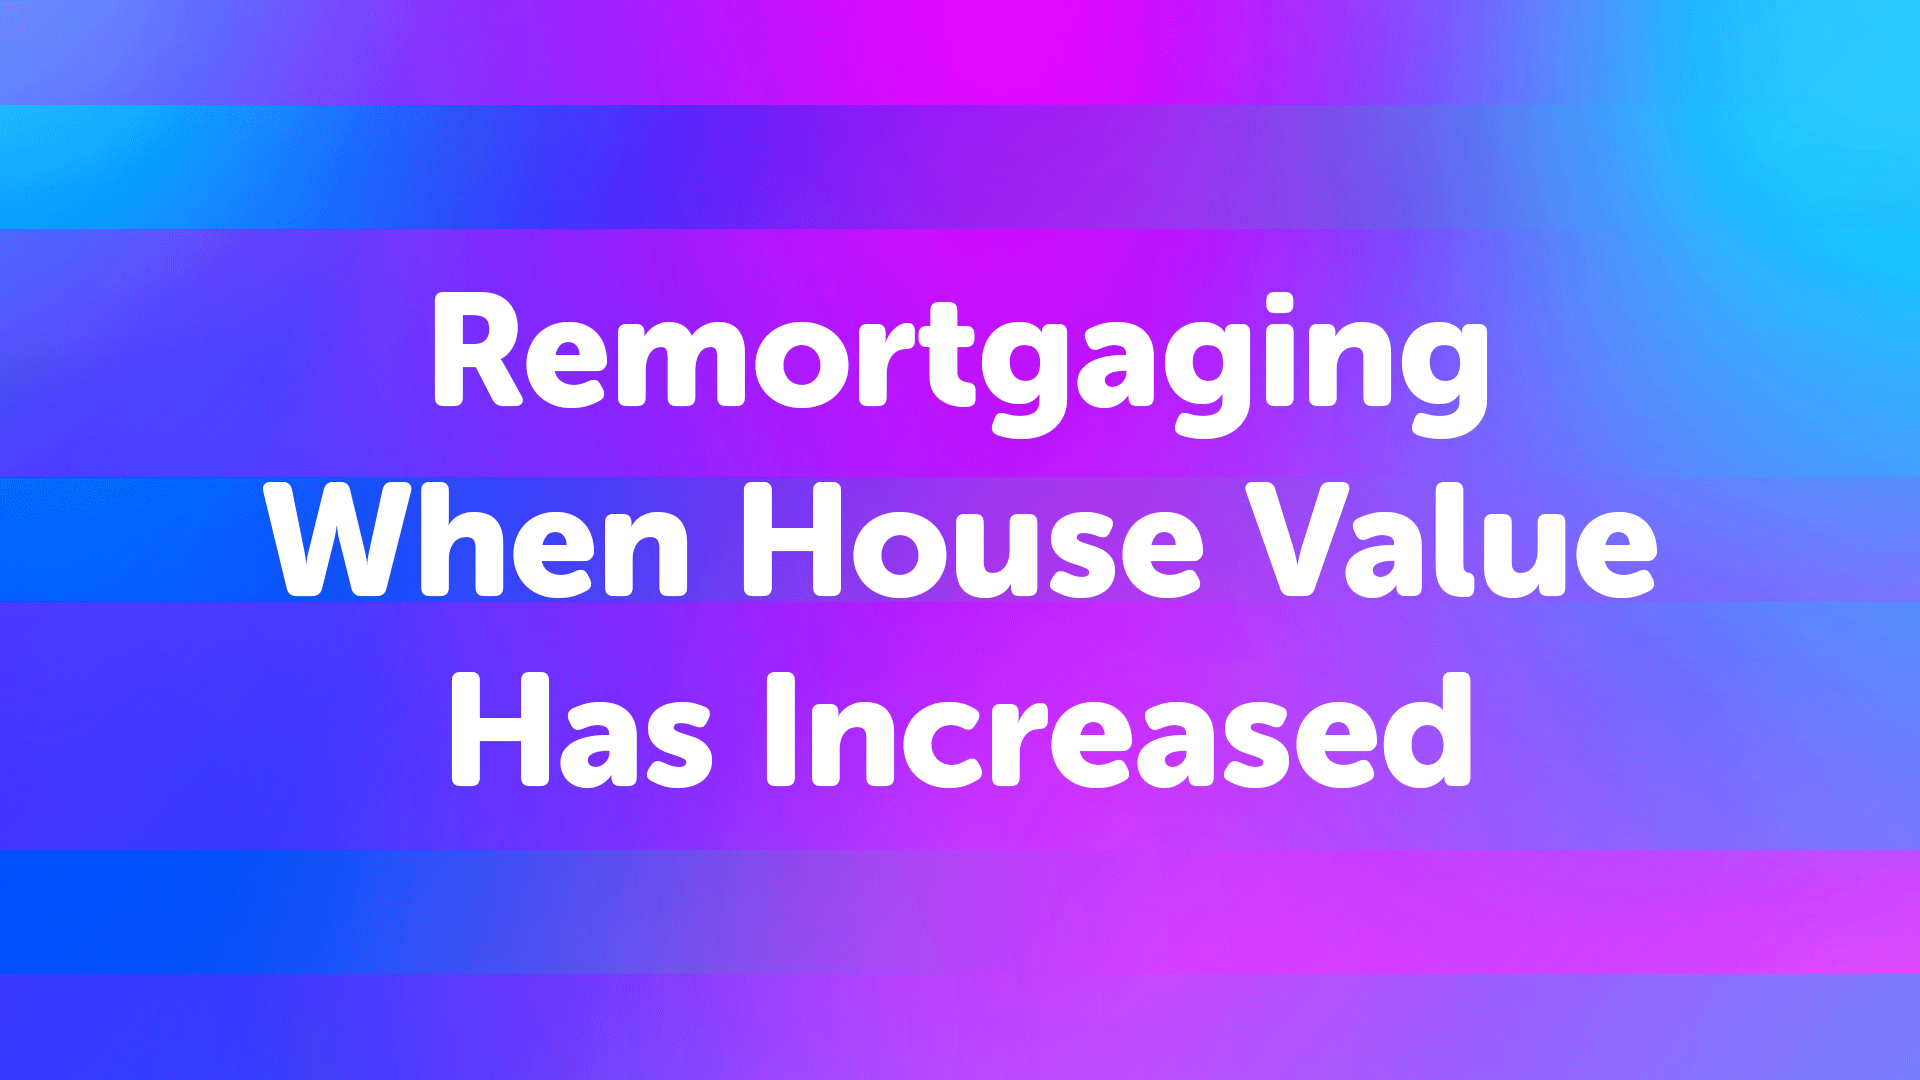 Remortgaging When House Value Has Increased